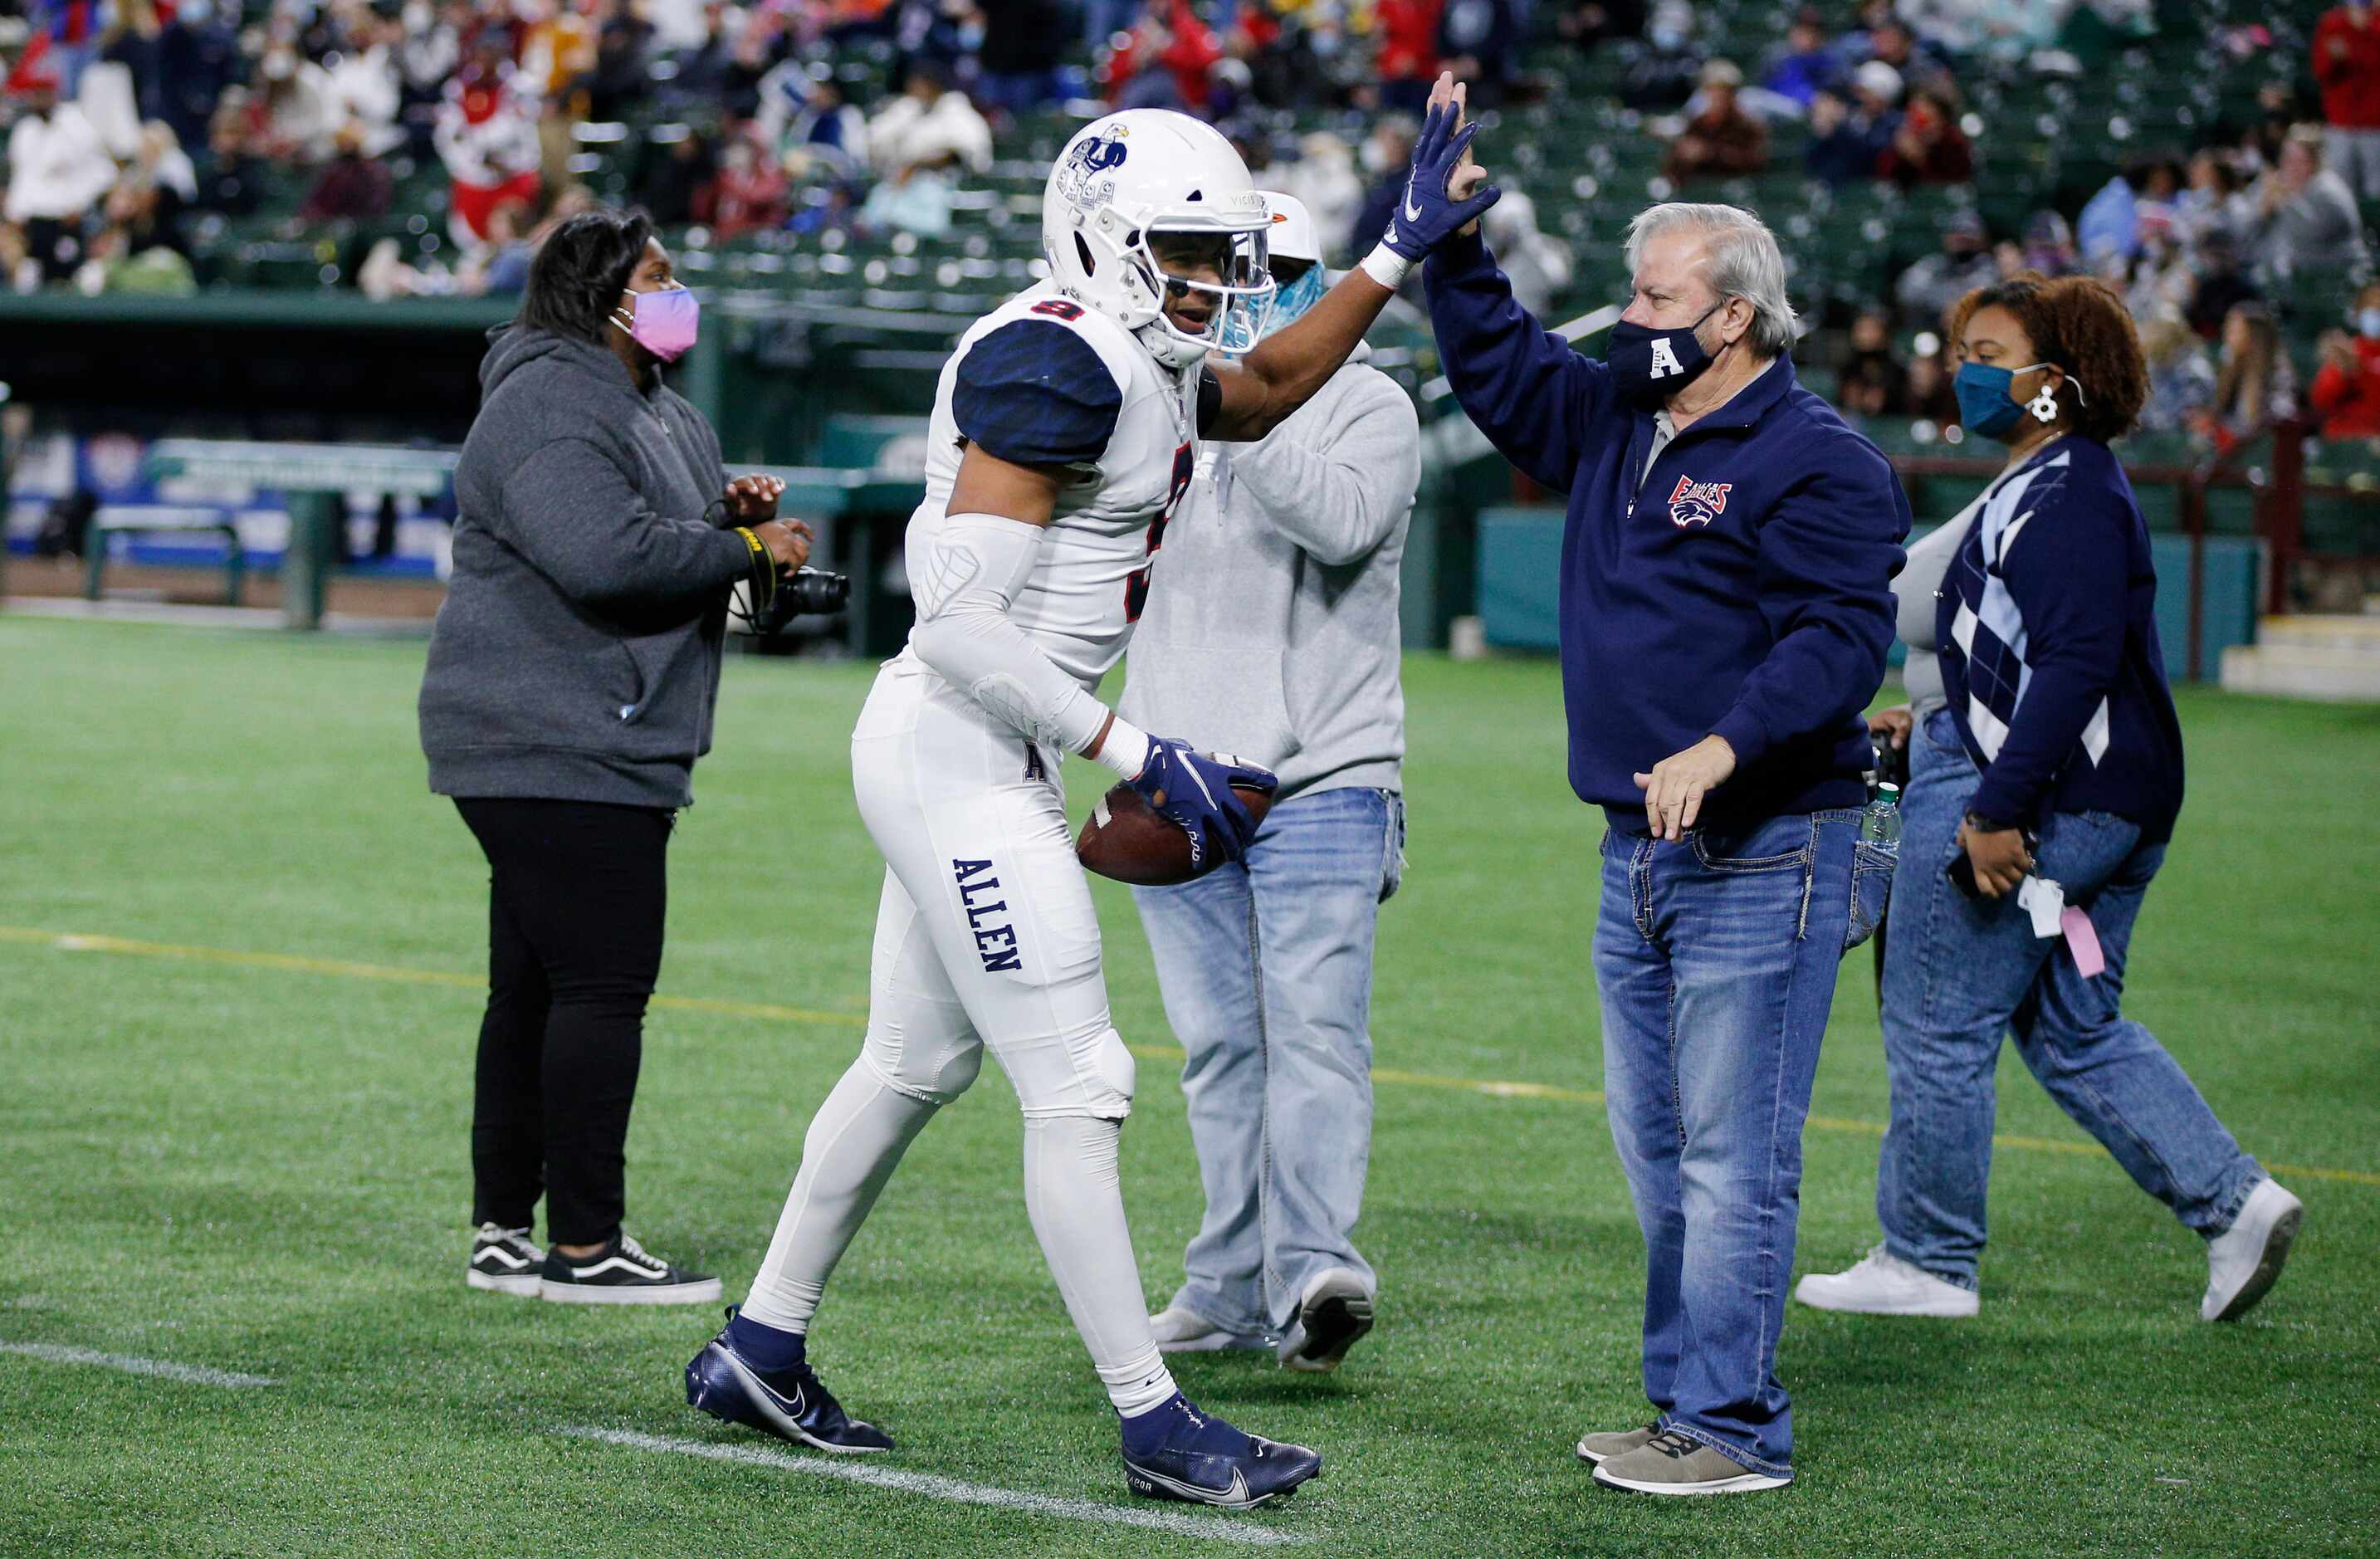 Allen senior wide receiver Bryson Green (9) high fives a fan on the sidelines after scoring...